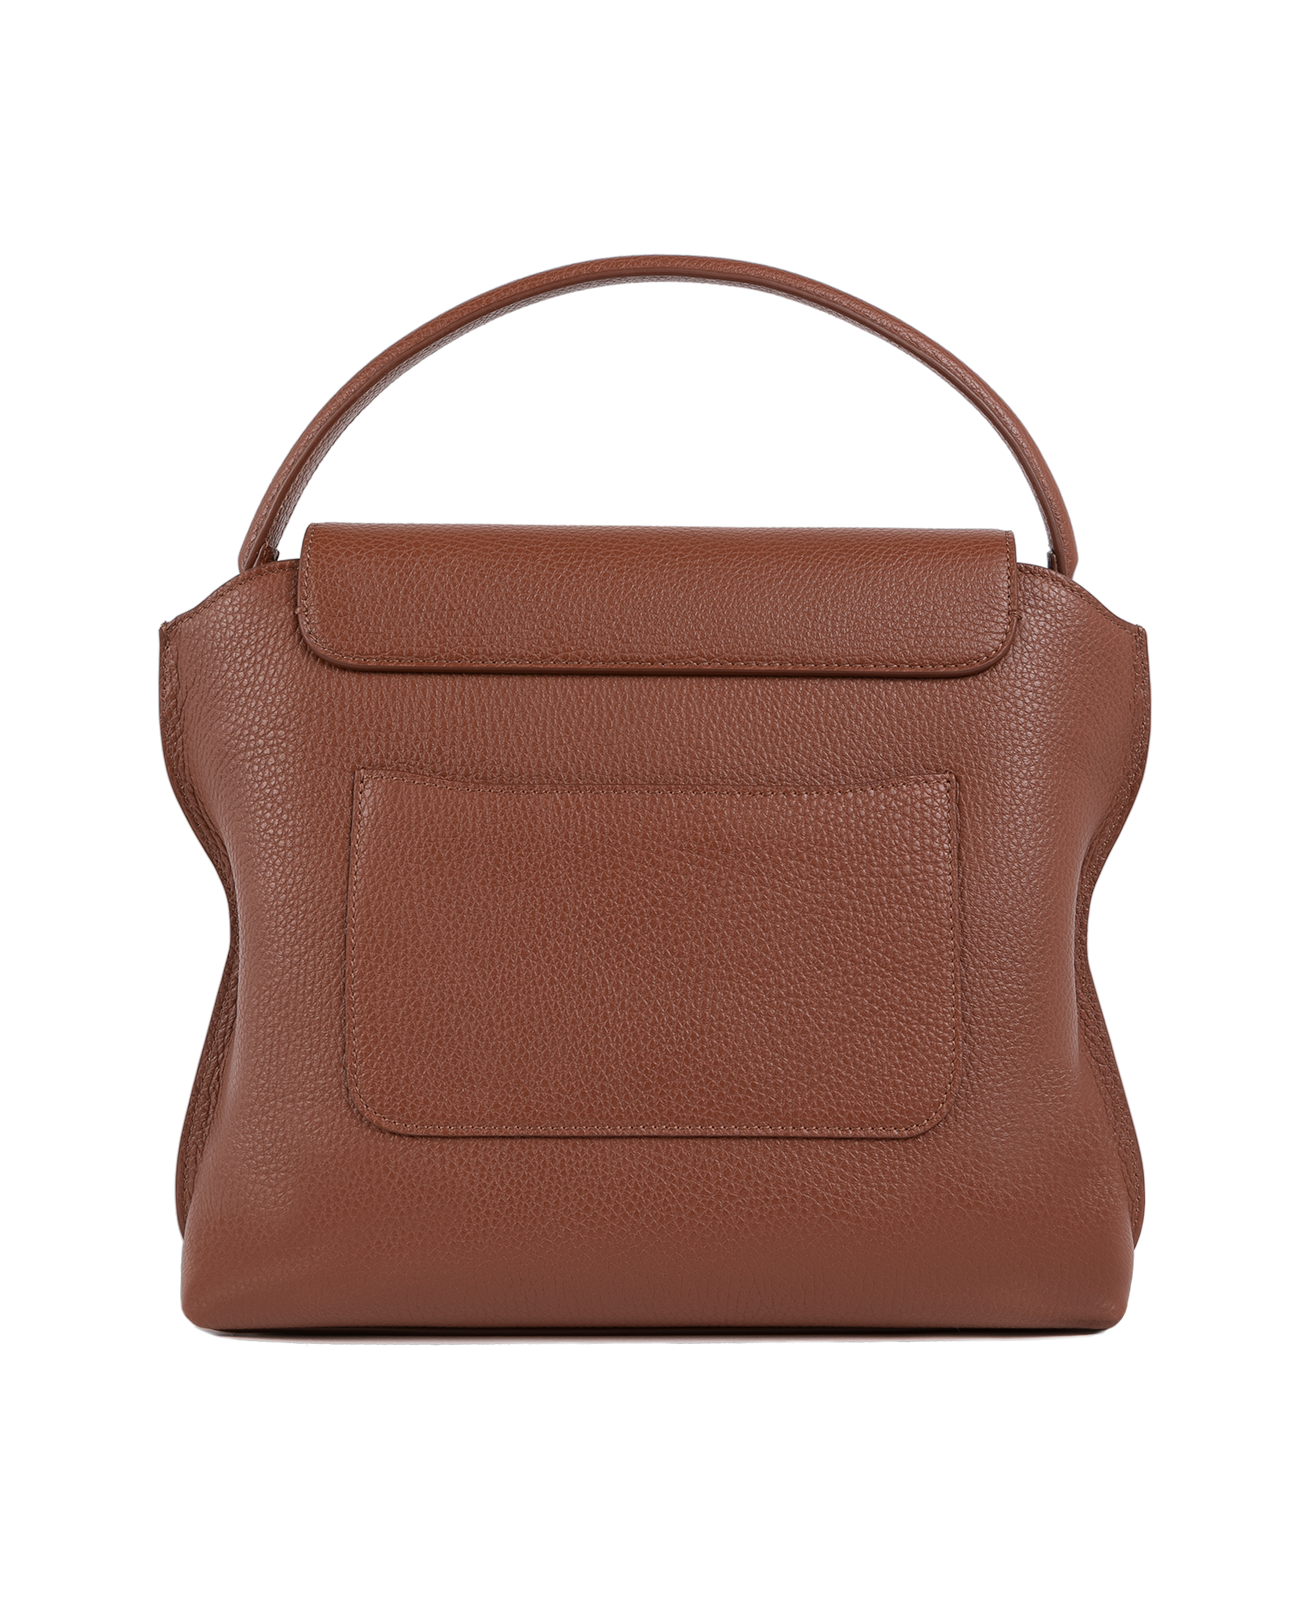 Cross-body bag in Italian full-grain leather, semi-aniline calf Italian leather with detachable shoulder strap.Three compartments, zip pocket in the back compartment. Magnetic flap closure with logo. Color: Dark Brown. Size: Large.